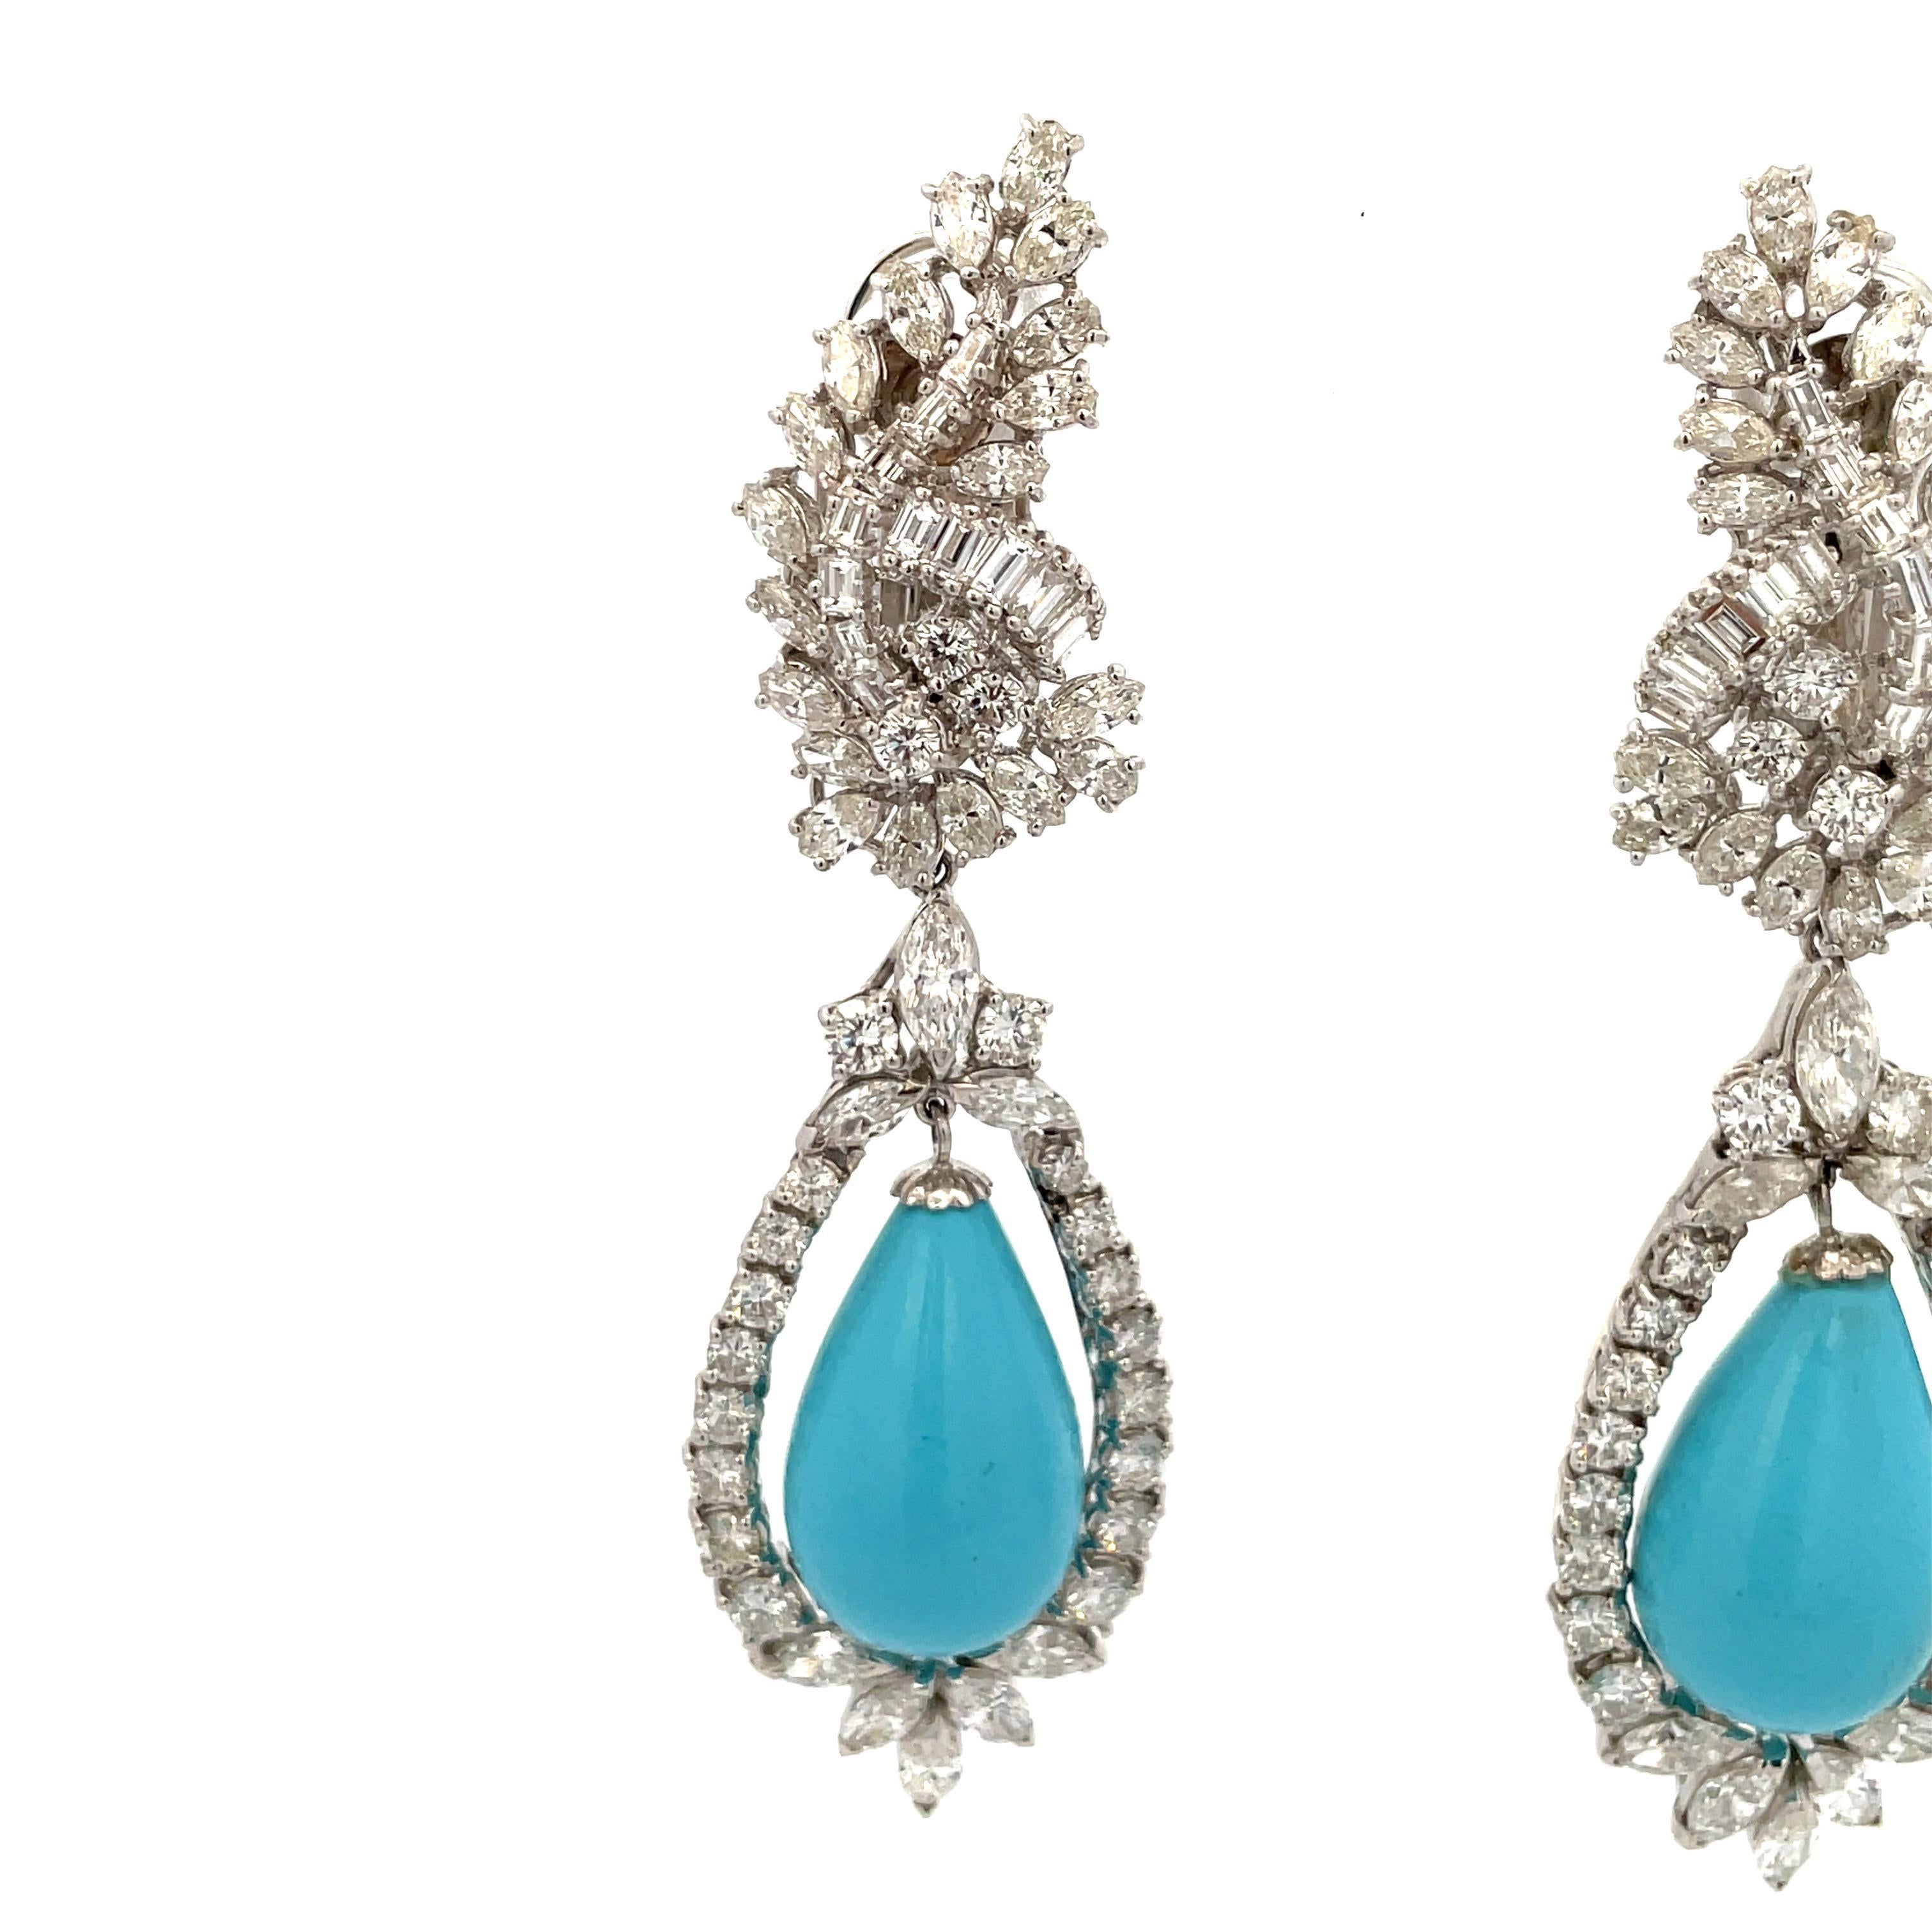 Platinum drop earrings featuring marquise, baguette and round brilliants weighing approximately 9.85 Carats with two Turquoise measuring 22 * 13 mm, circa 1960s. 